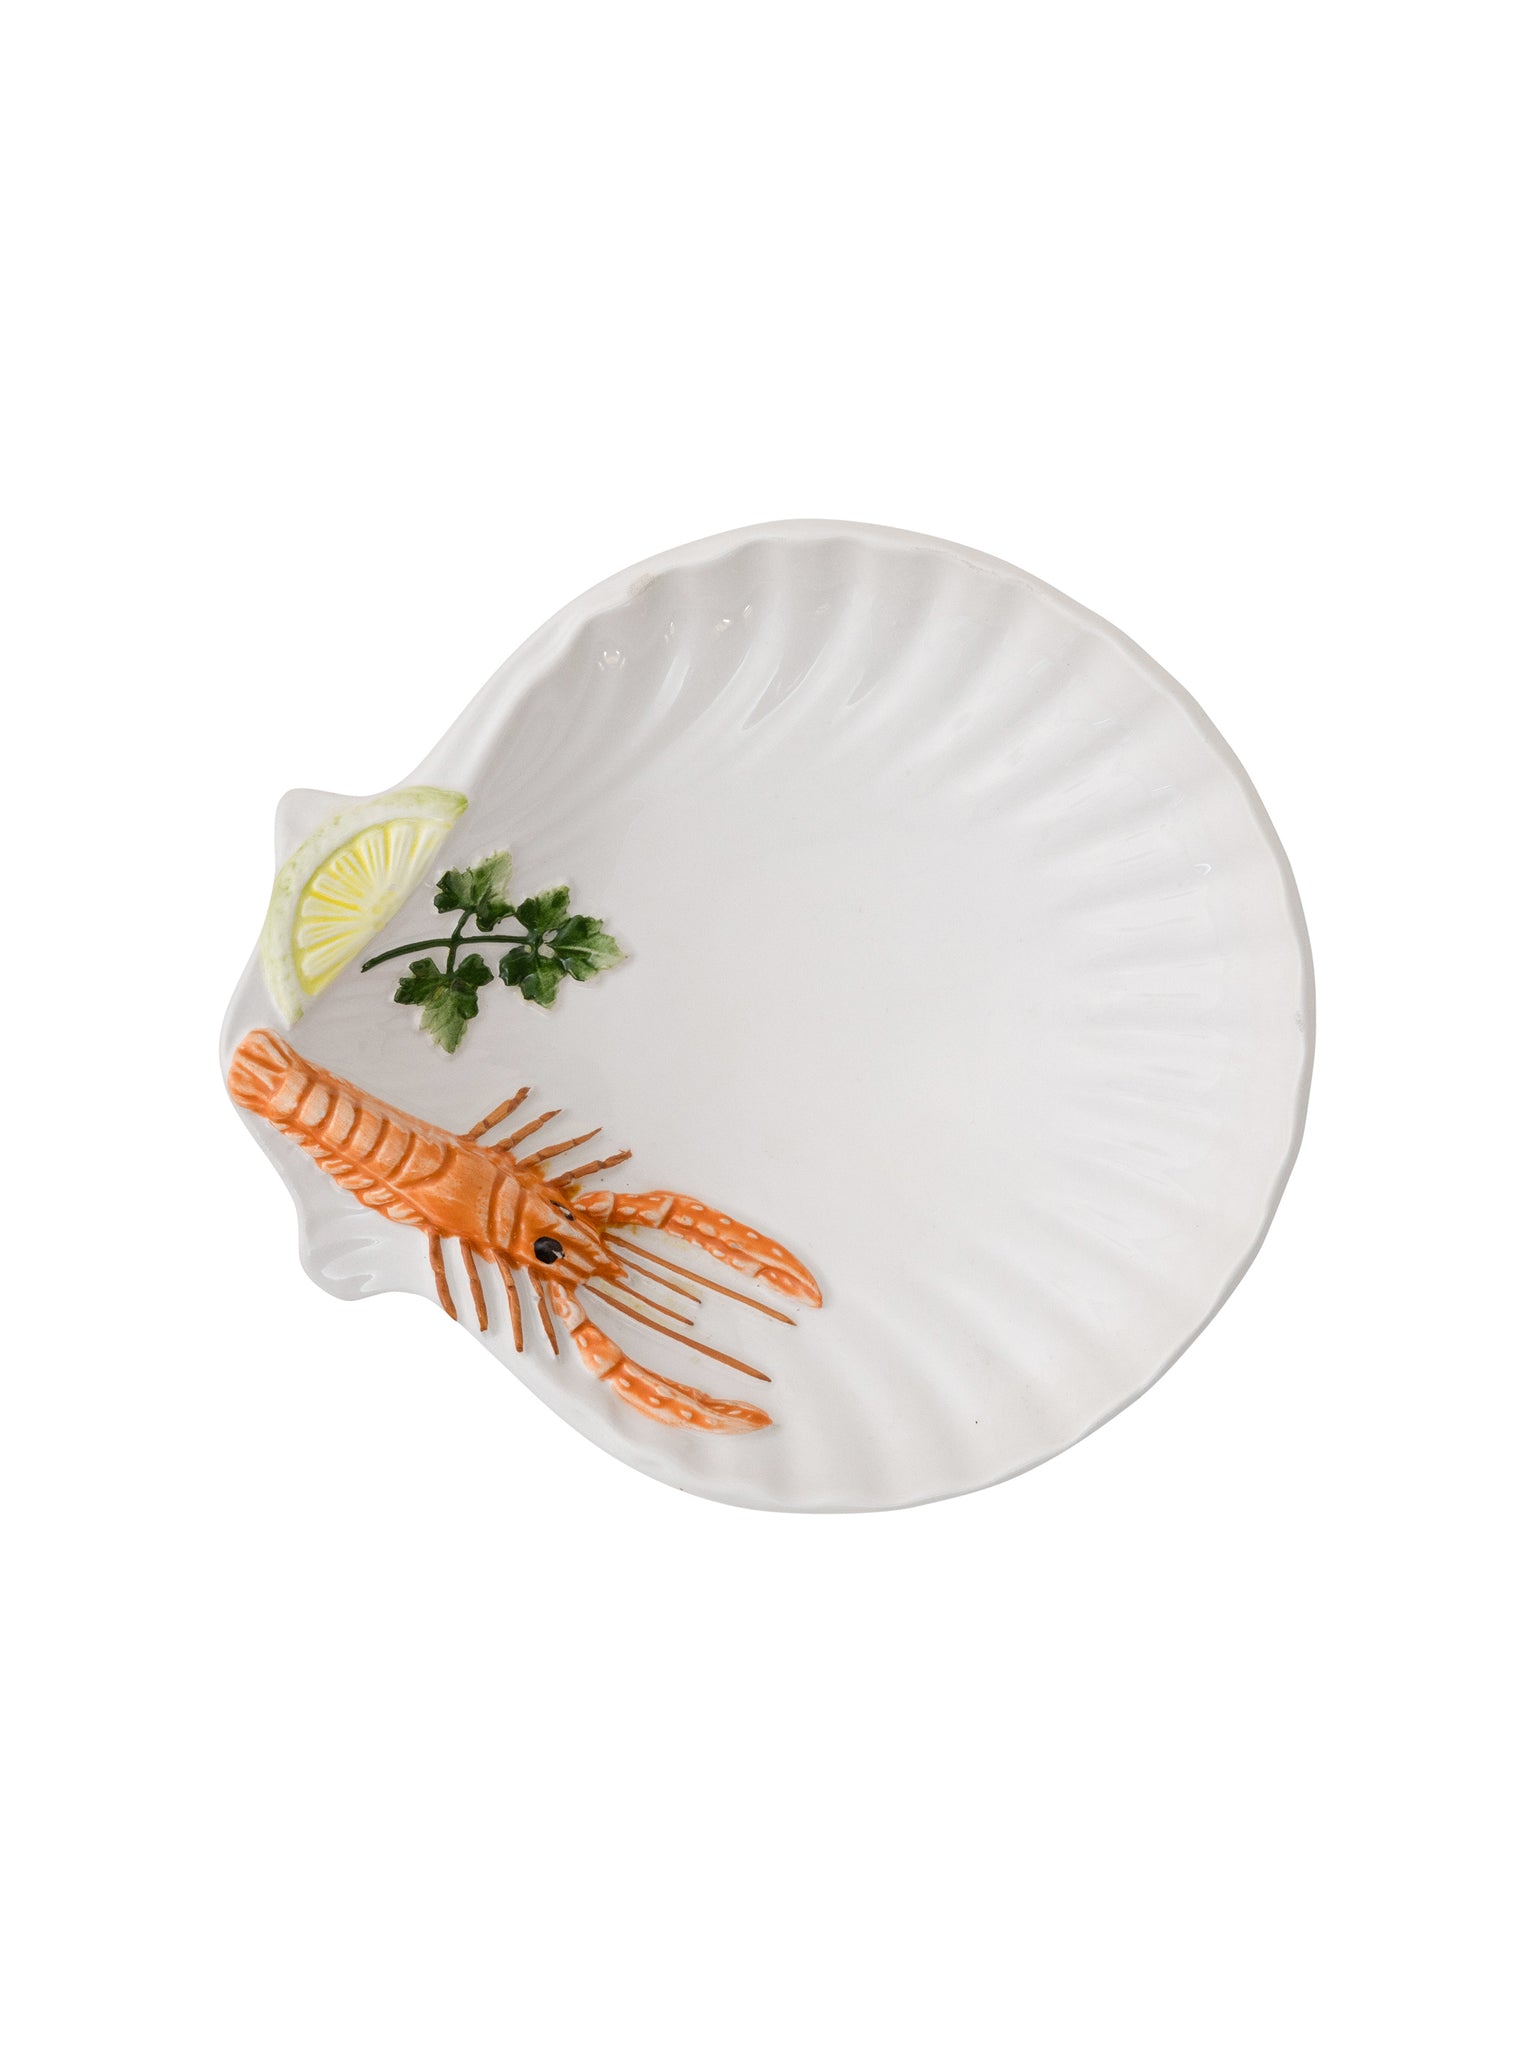 Vintage Scallop Shell Seafood Dish Weston Table